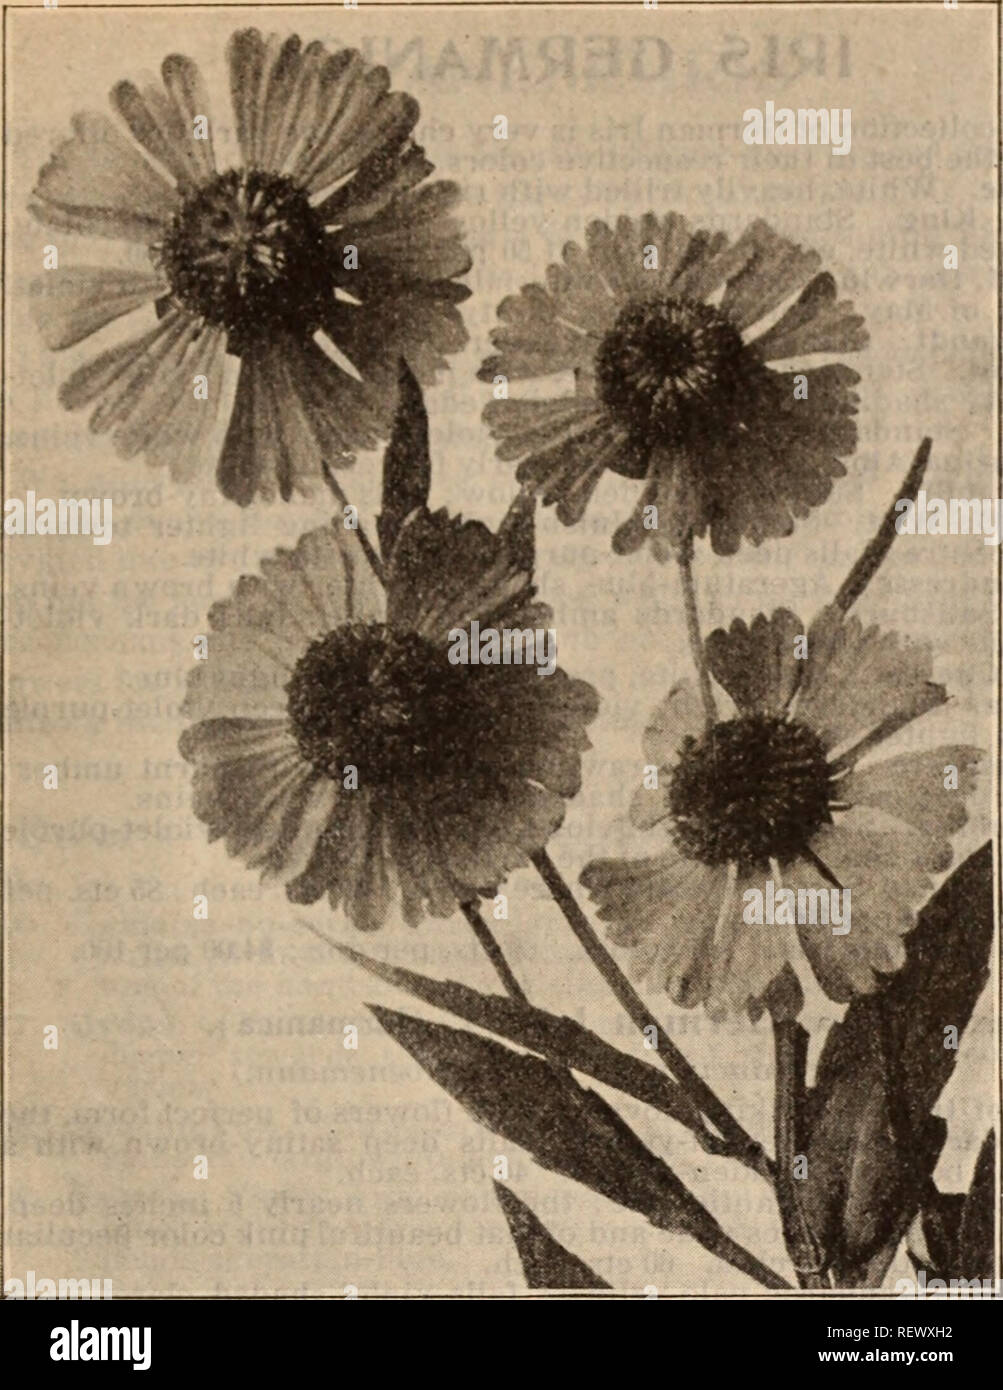 . Dreer's wholesale price list / Henry A. Dreer.. Nursery Catalogue. HENRY A. DREER, PHILADELPHIA, PA., WHOLESALE PRICE LIST 45. HELENIUM RIVERTON BEAUTY Geranium (Crane's Bill). Per doz. Per 100 Grandiflorum. 3-inch pots $1 00 $7 00 Platypetalum. 3-inch pots 1 00 7 00 Sanguineum. 4-inch pots 85 6 00 Album. 4-inch pots 85 6 00 Geum (Avens). Atrosanguinea. 3-inch pots 100 7 00 Coccineum. 3-inch pots 1 00 7 00 Heldreichi. 3-inch pots 1 00 7 00 Mrs. Bradshaw (New). 3-inch pots 1 50 10 00 Qunnera. Scabra. Fine strong- plants in 5-inch pots of this grand foliage plant. 35 cents each; $3.50 per doze Stock Photo